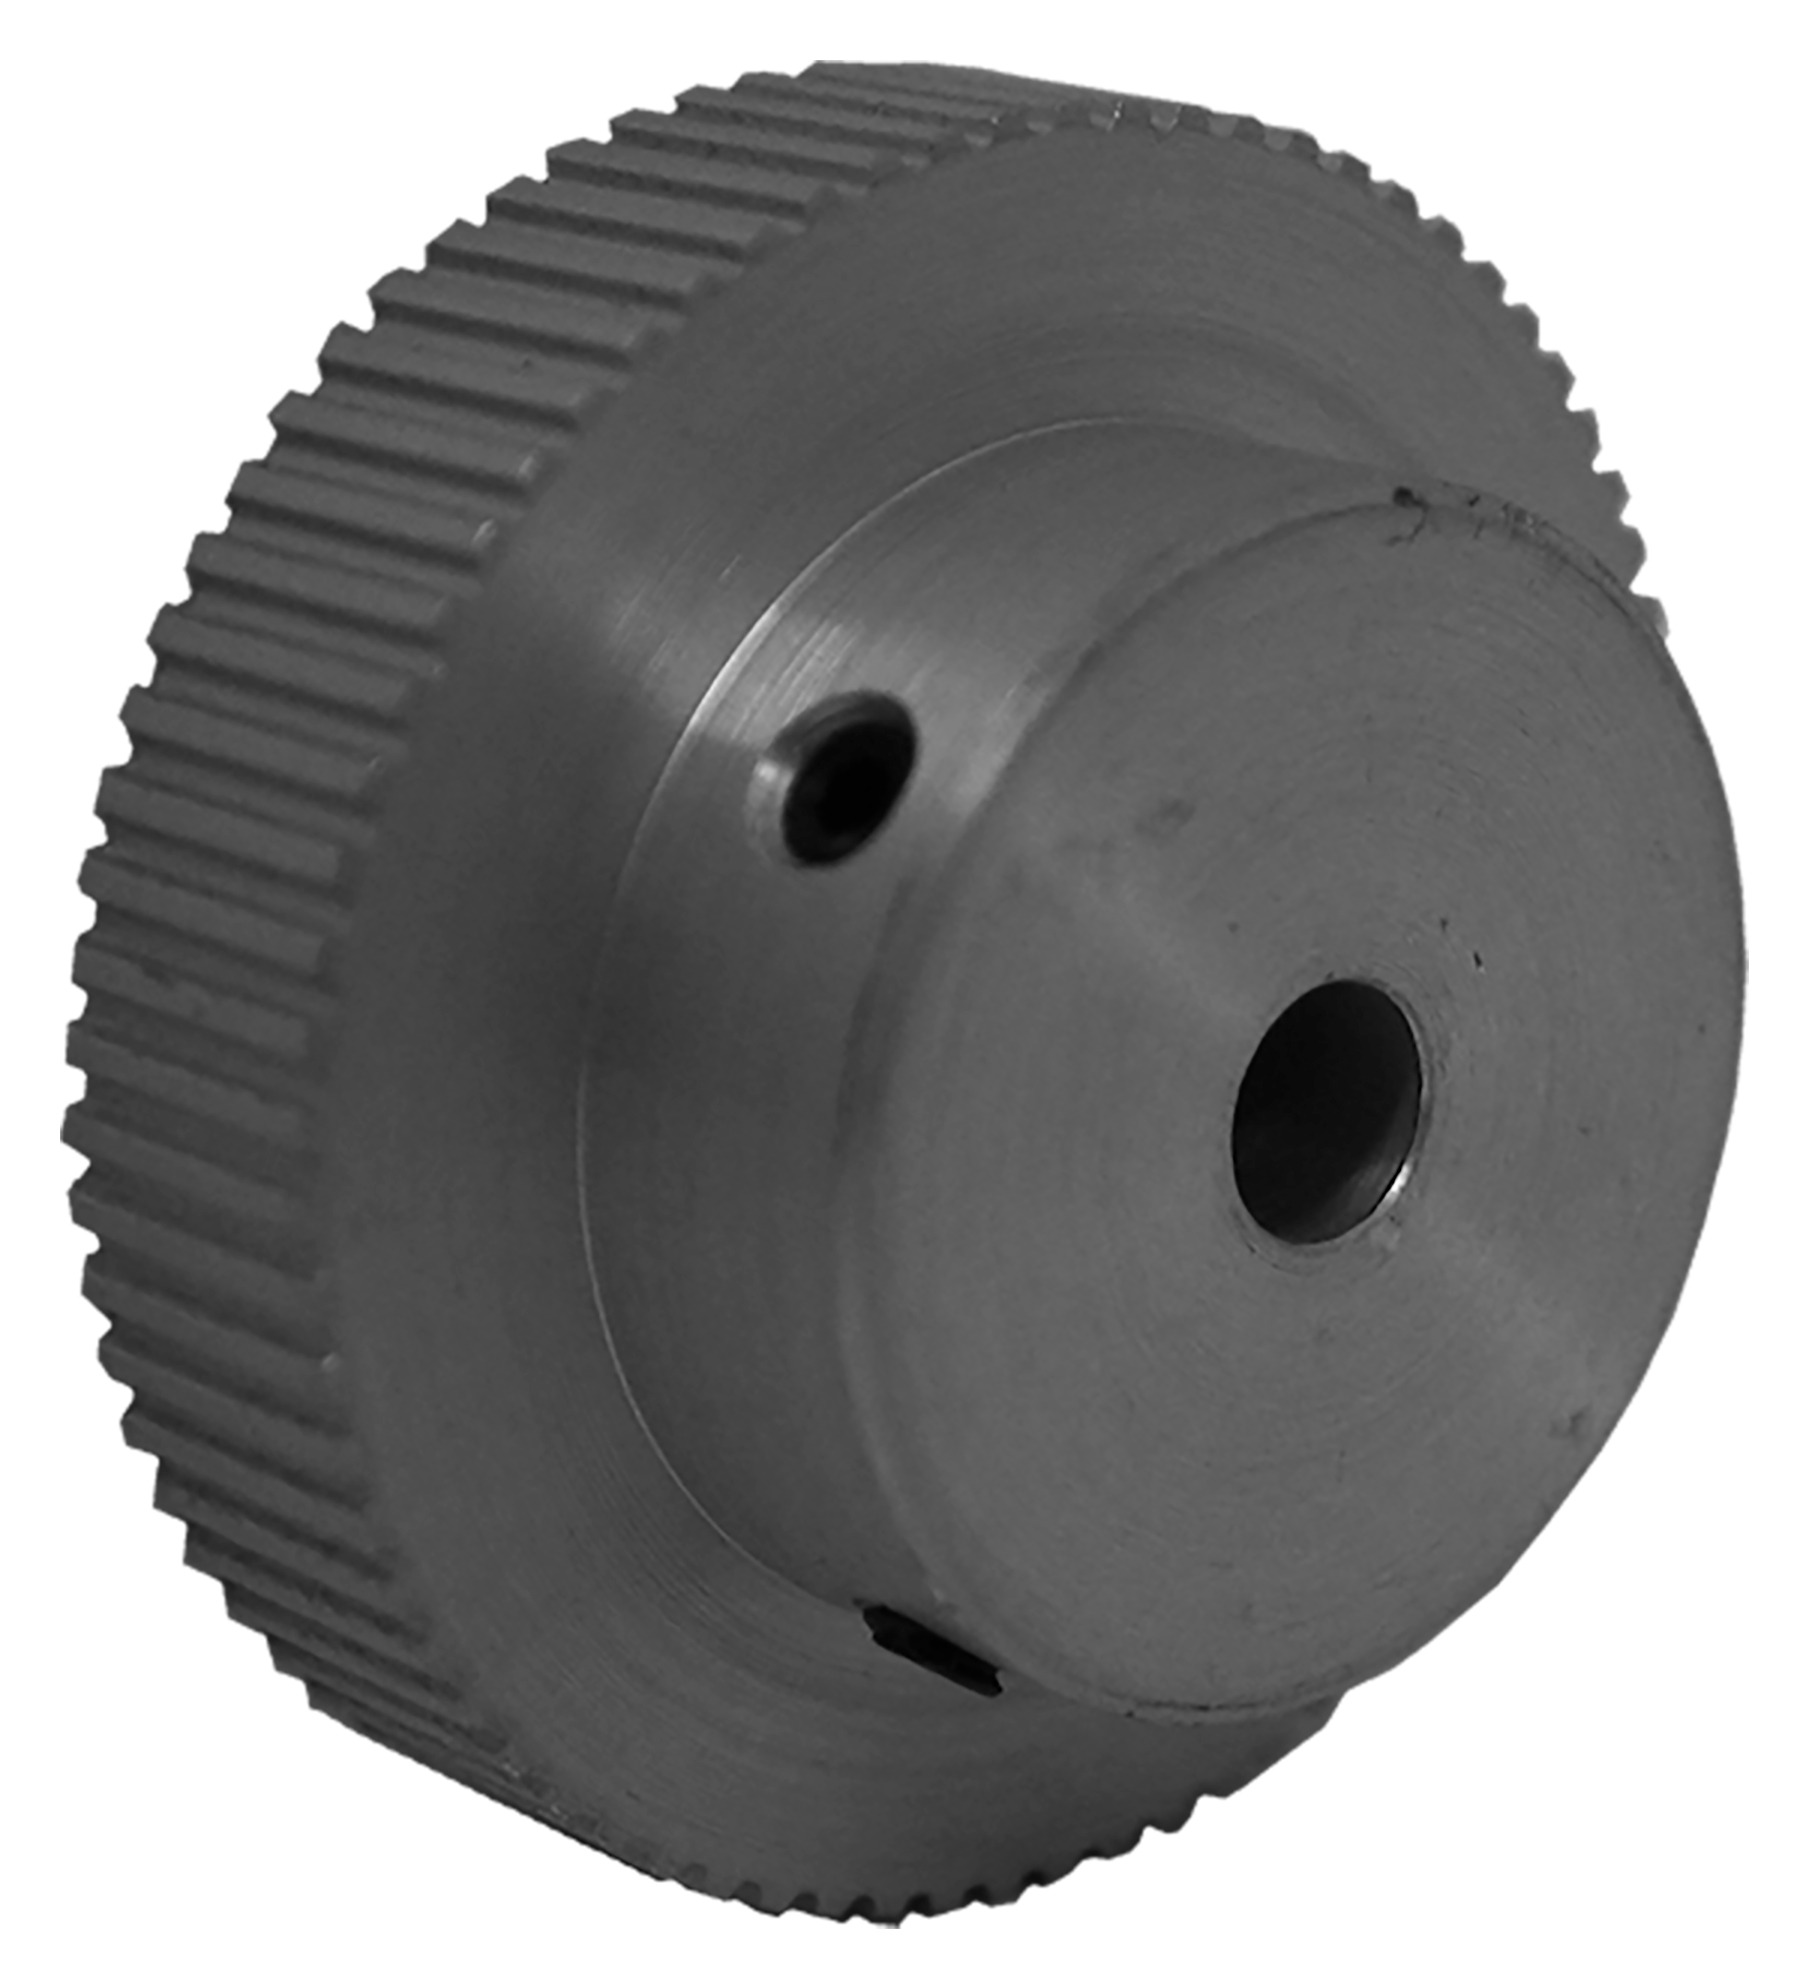 72MP025-6A3 - Aluminum Imperial Pitch Pulleys